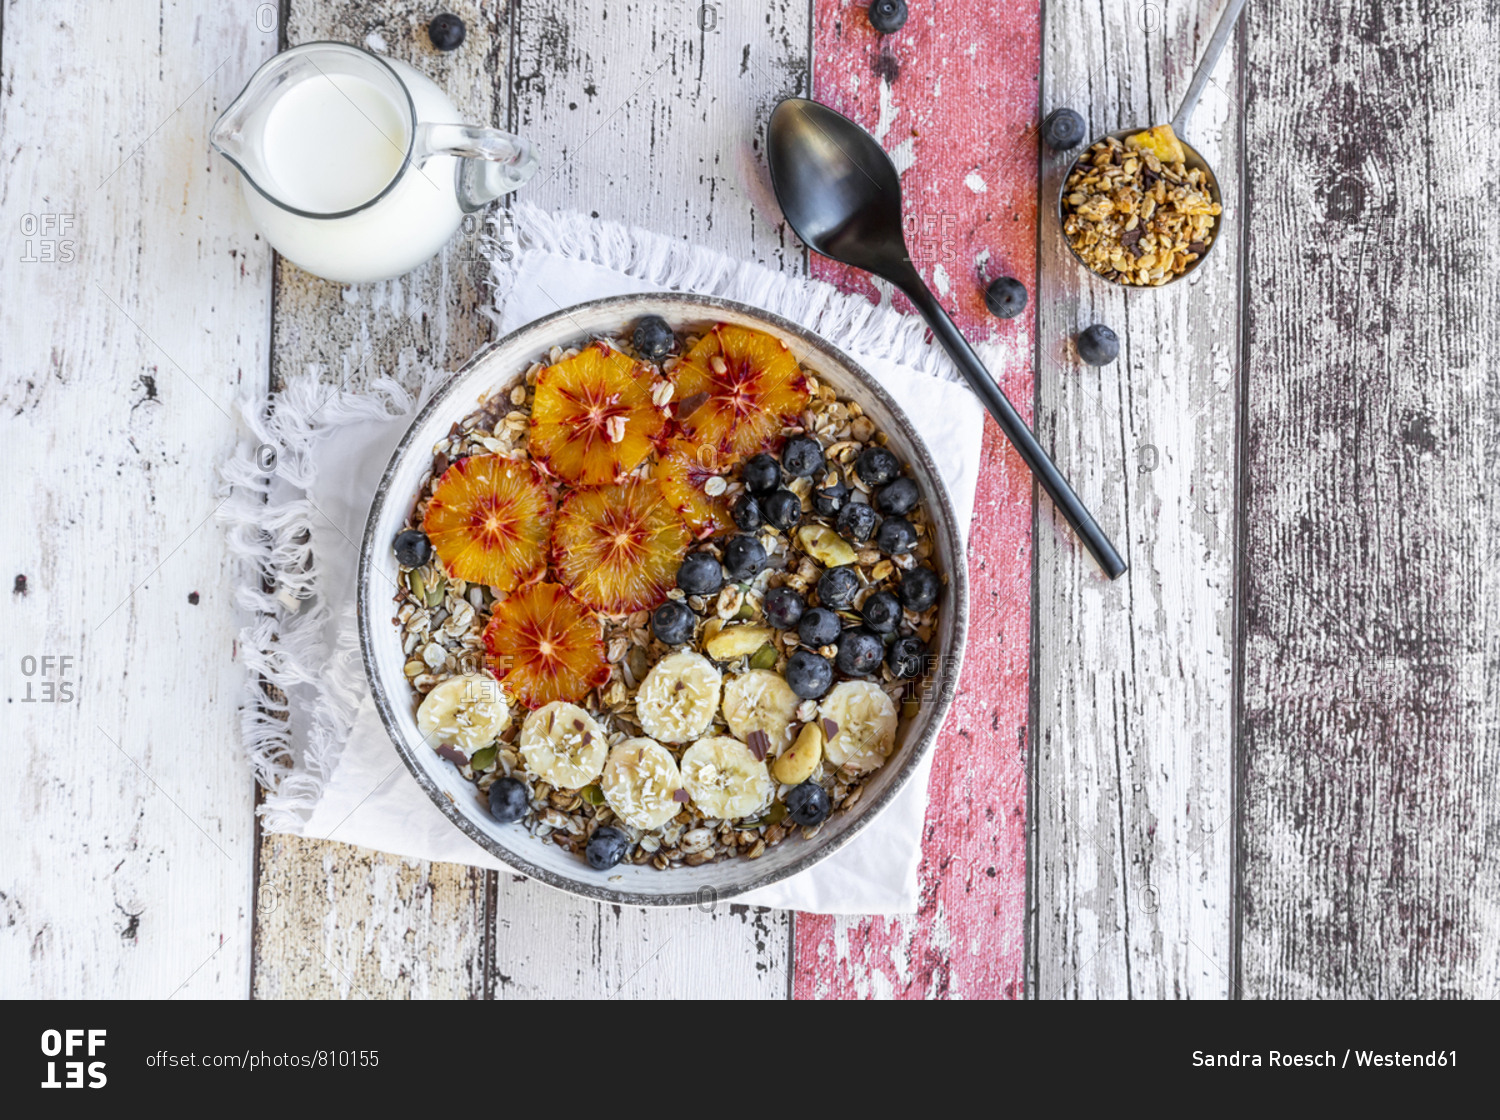 Cereals with banana- blueberries- blood orange- coconut flakes and milk